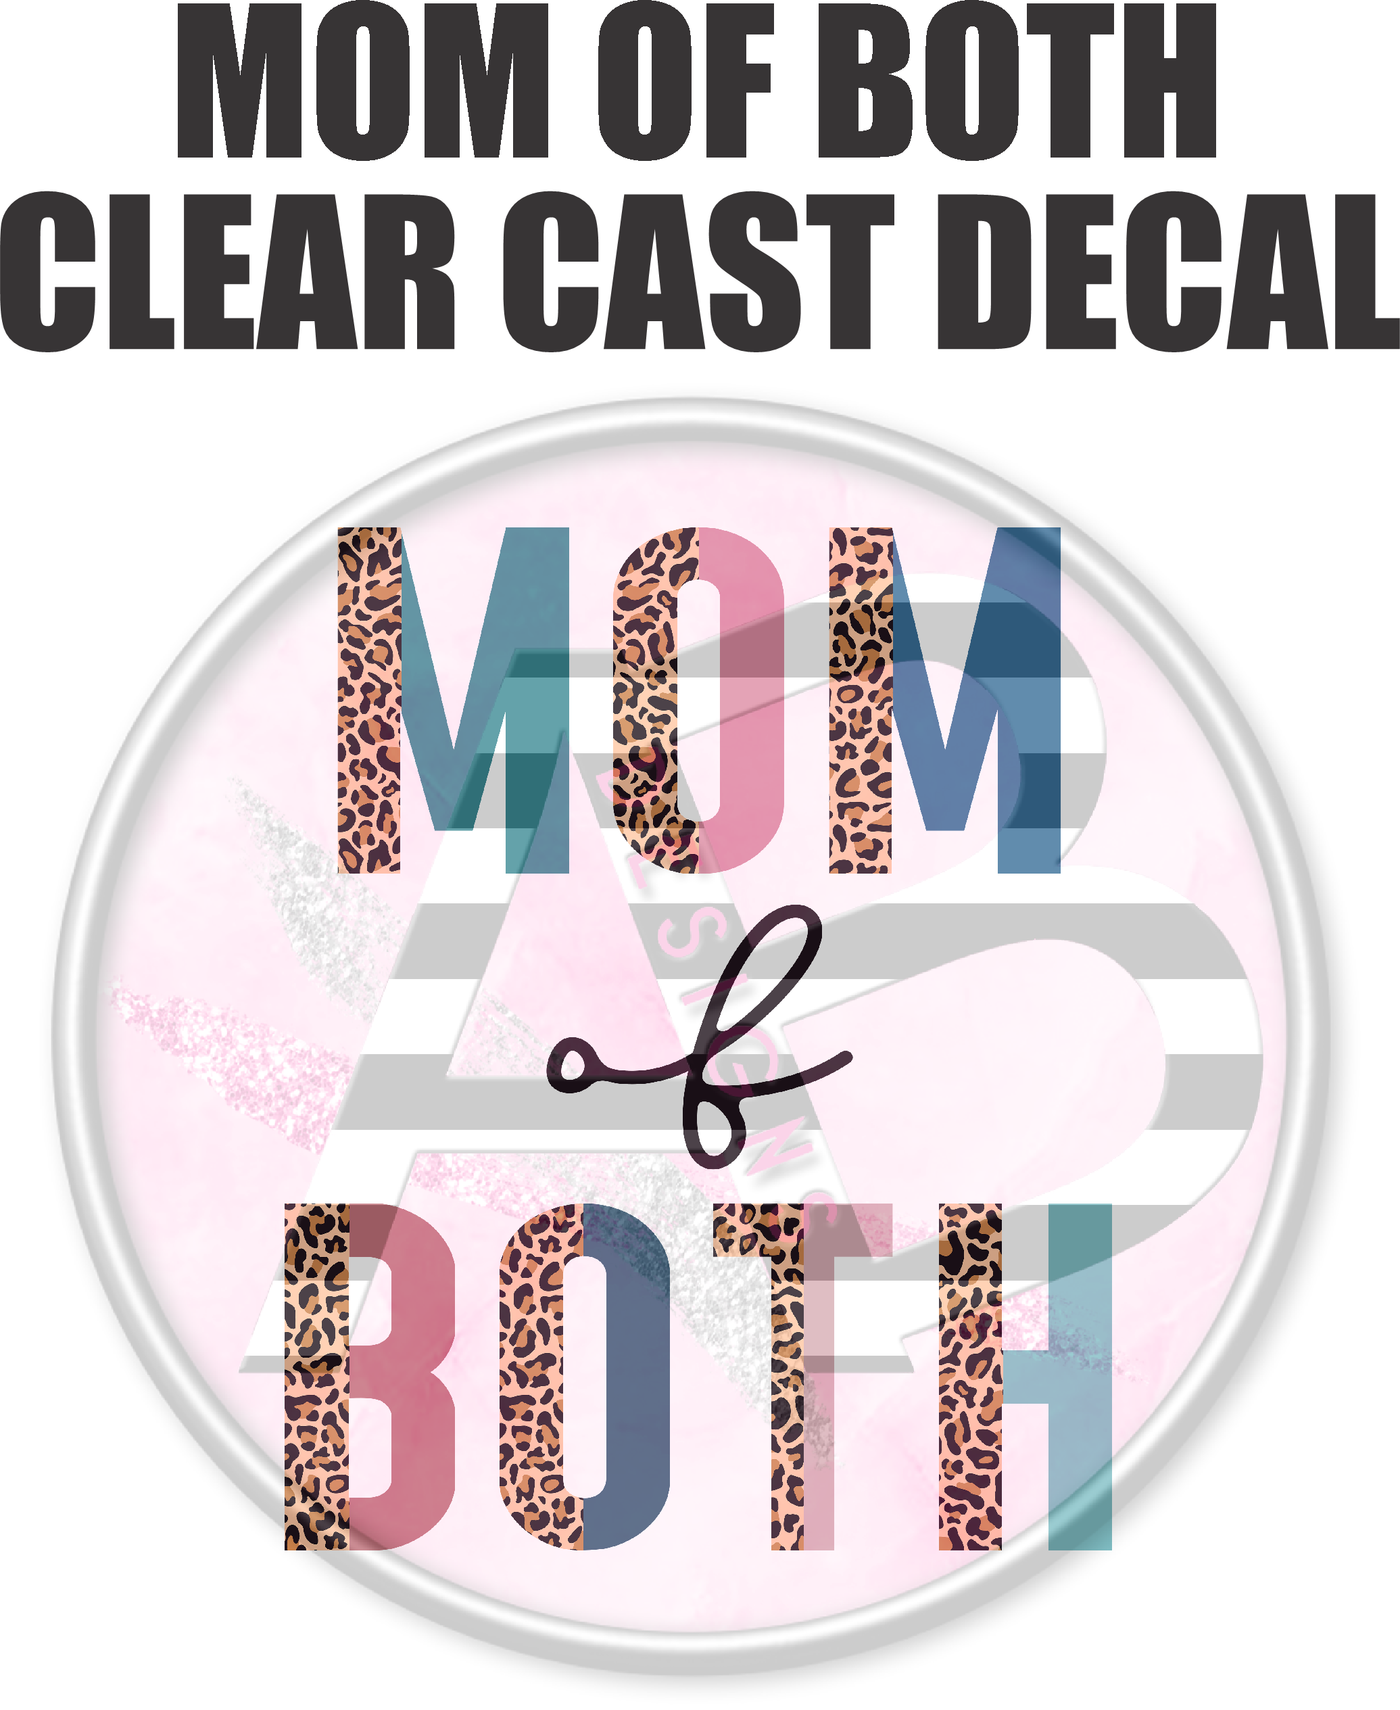 Mom of Both - Clear Cast Decal